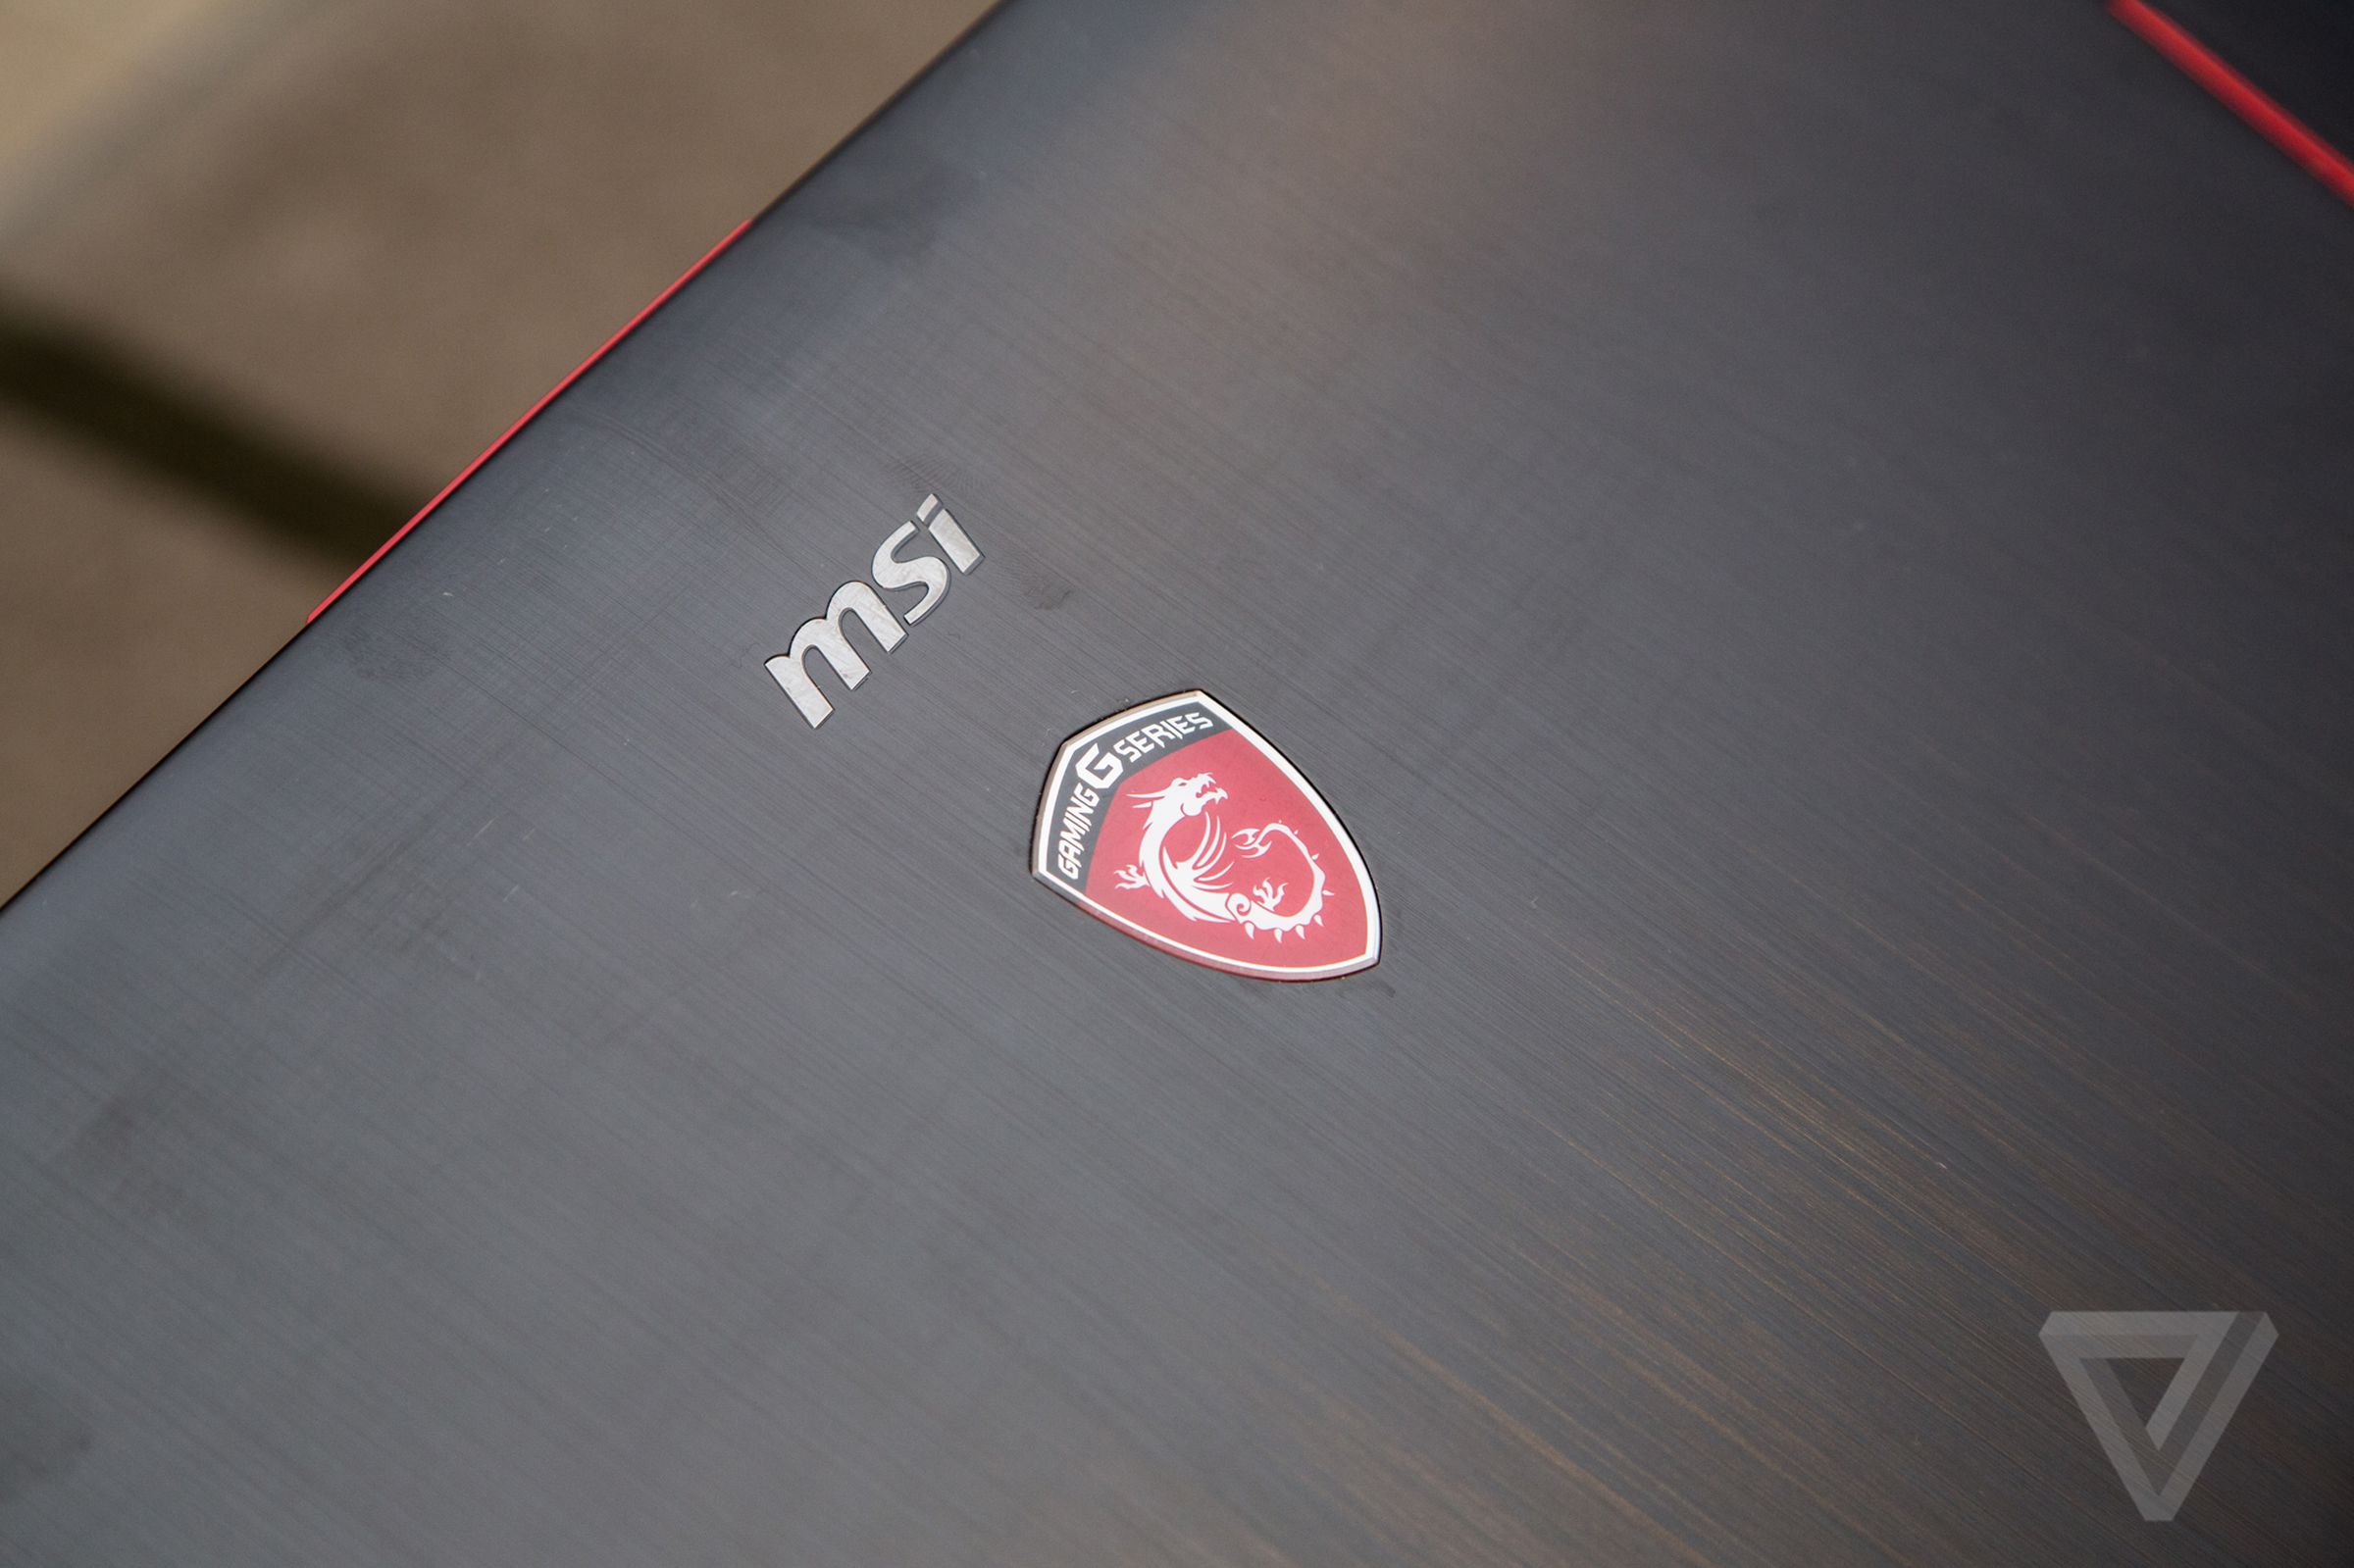 MSI GT80 Titan with Mechanical Keyboard in photos